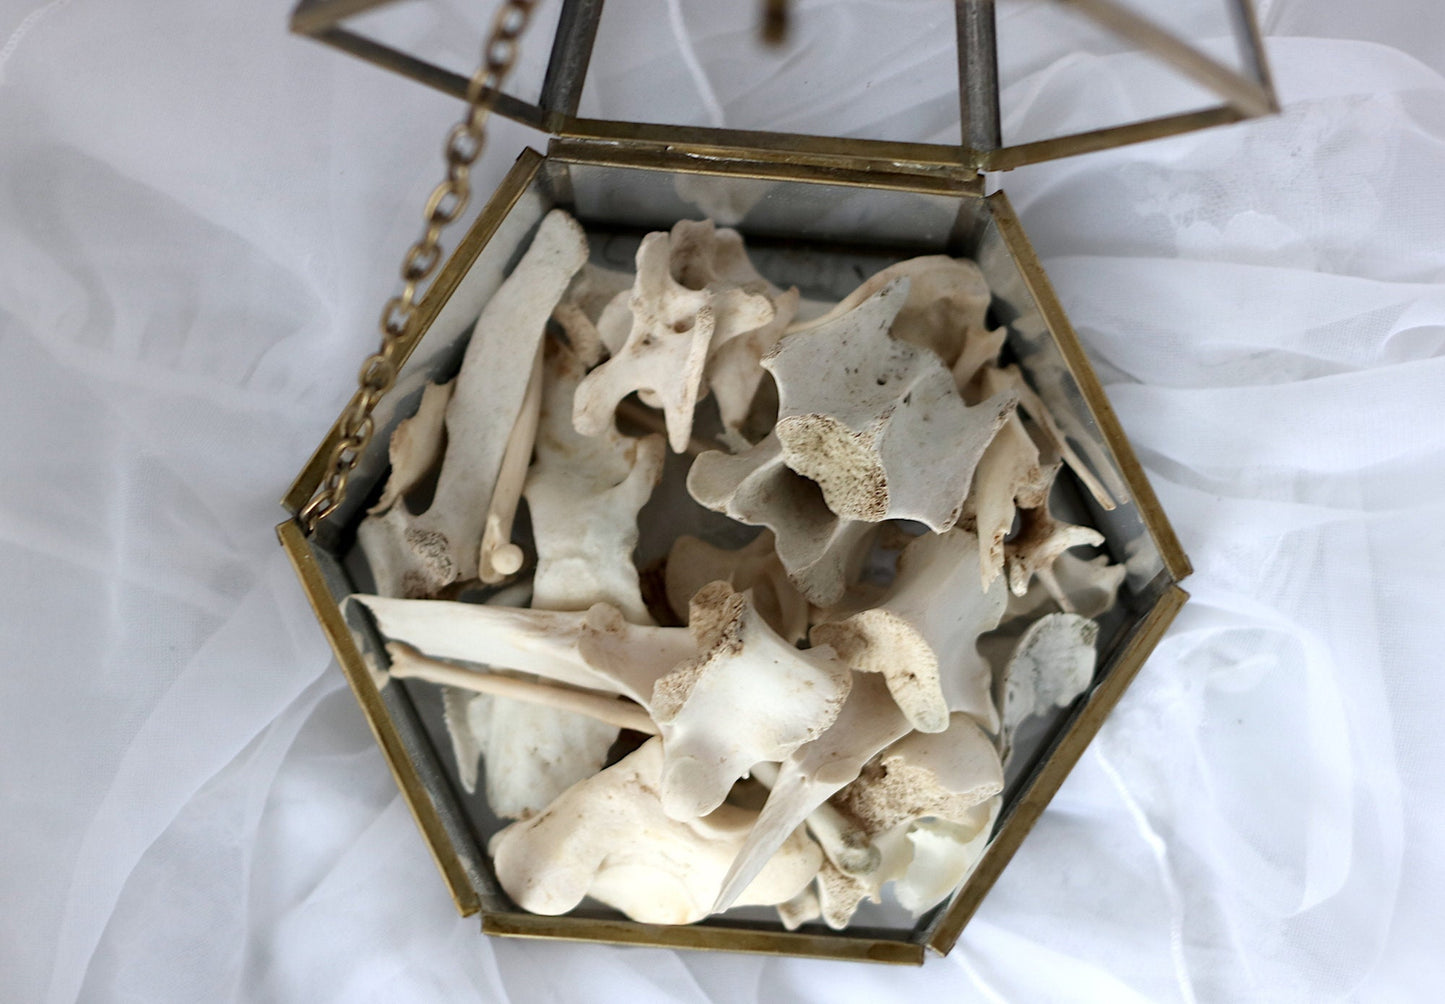 Box of Bones! Real Animal Bones, Ethically Sourced Taxidermy | Oddities & Curiosities, Goblincore Wunderkammer